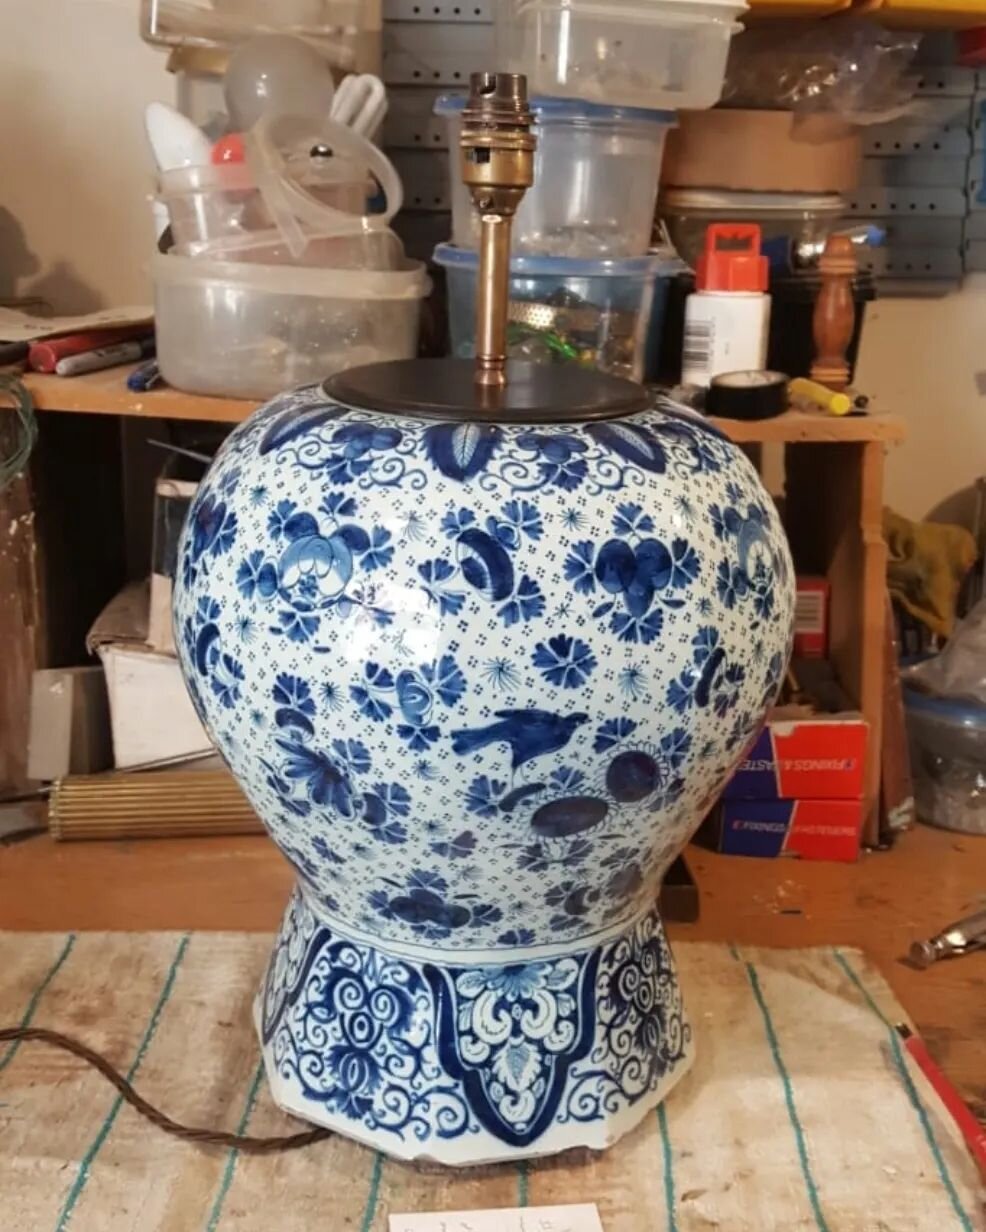 .
🔴18th century delft vase converted to a lamp.

#delft 
#delftlamp 
#delftblue 
#delftvase 
#antiquelamp 
#antiquelight